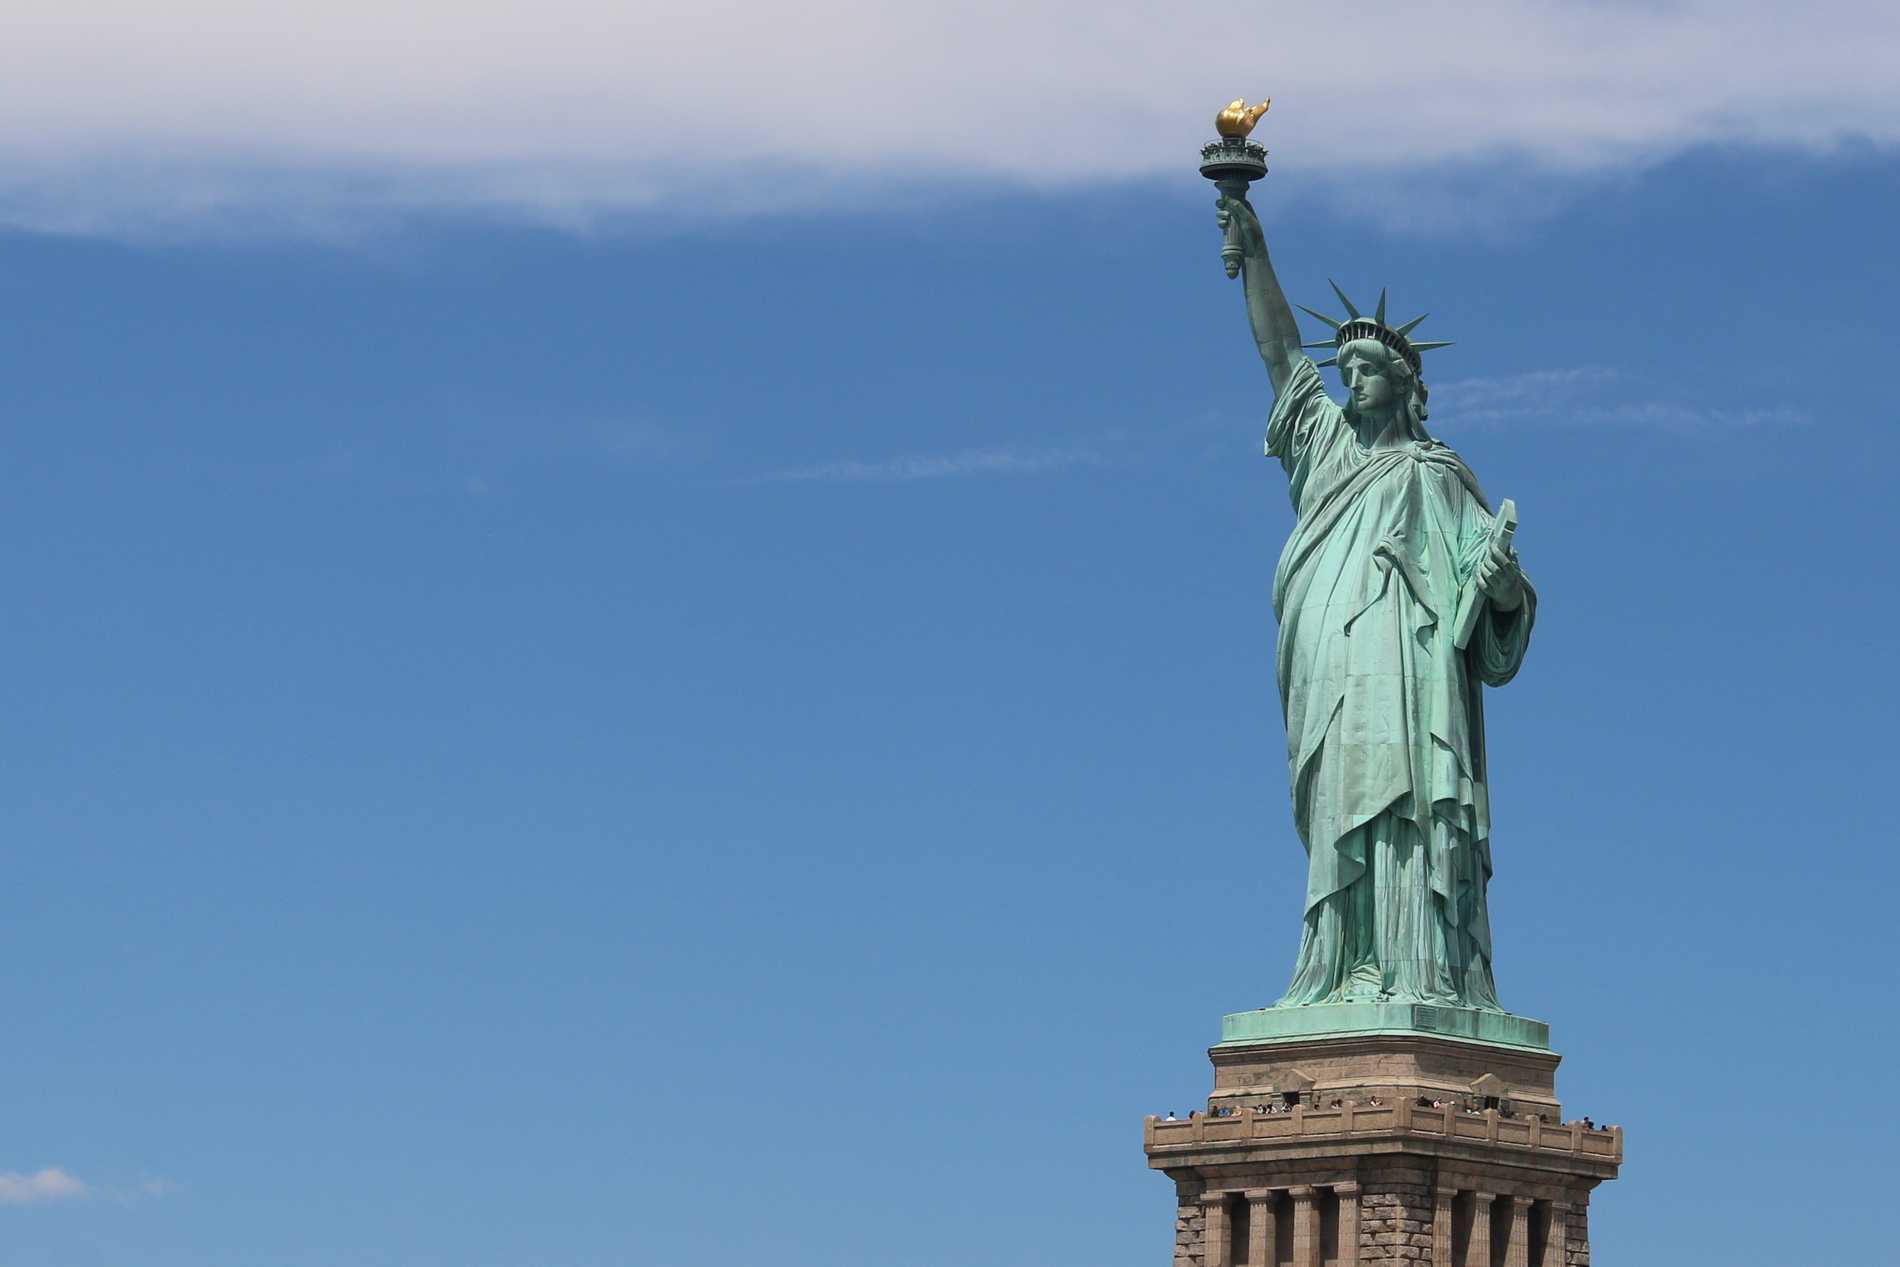 A green Statue of Liberty in front of a bright blue sky holding her torch aloft.